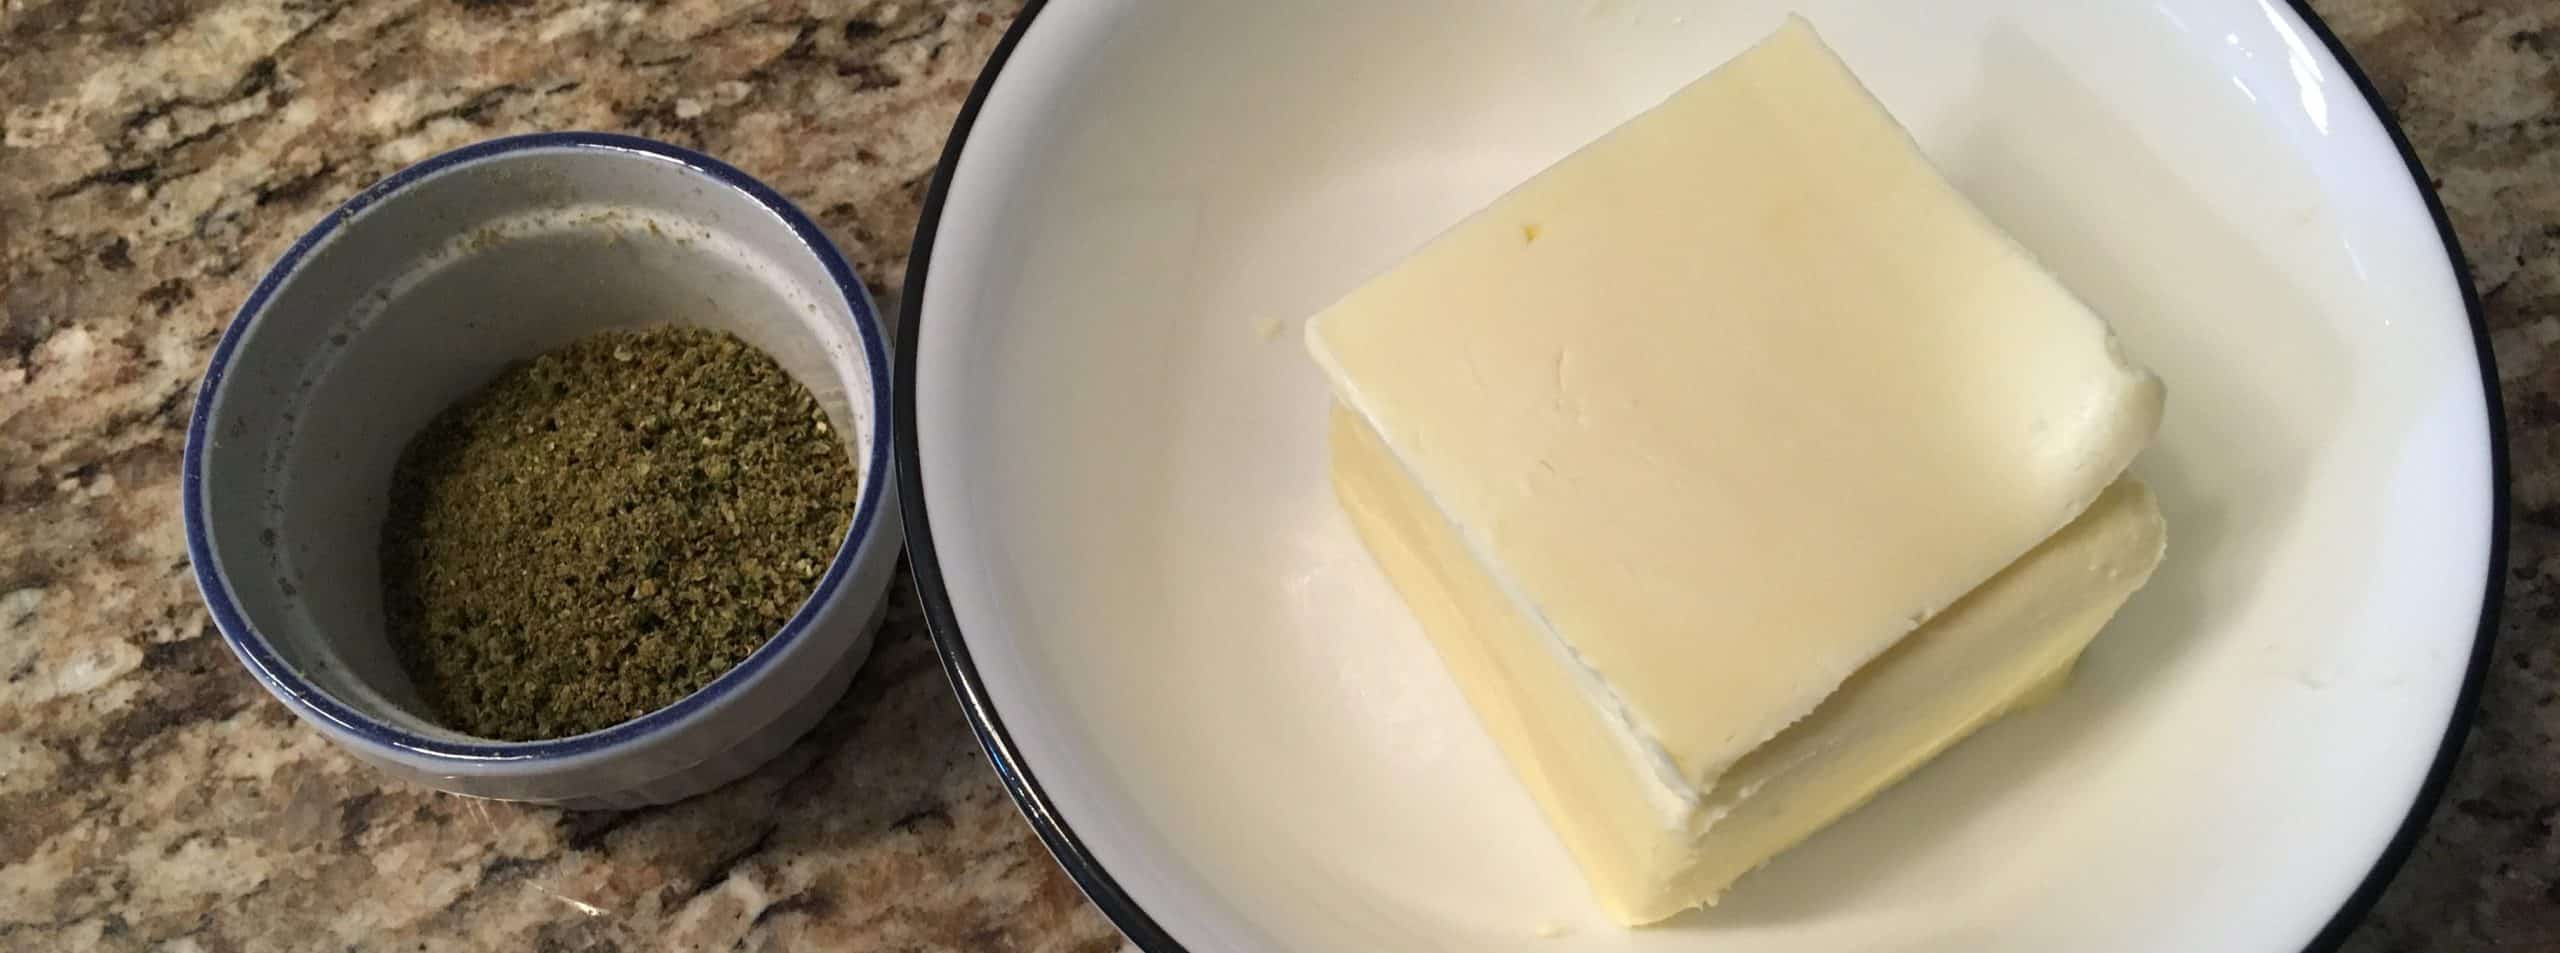 Cannabis and Butter